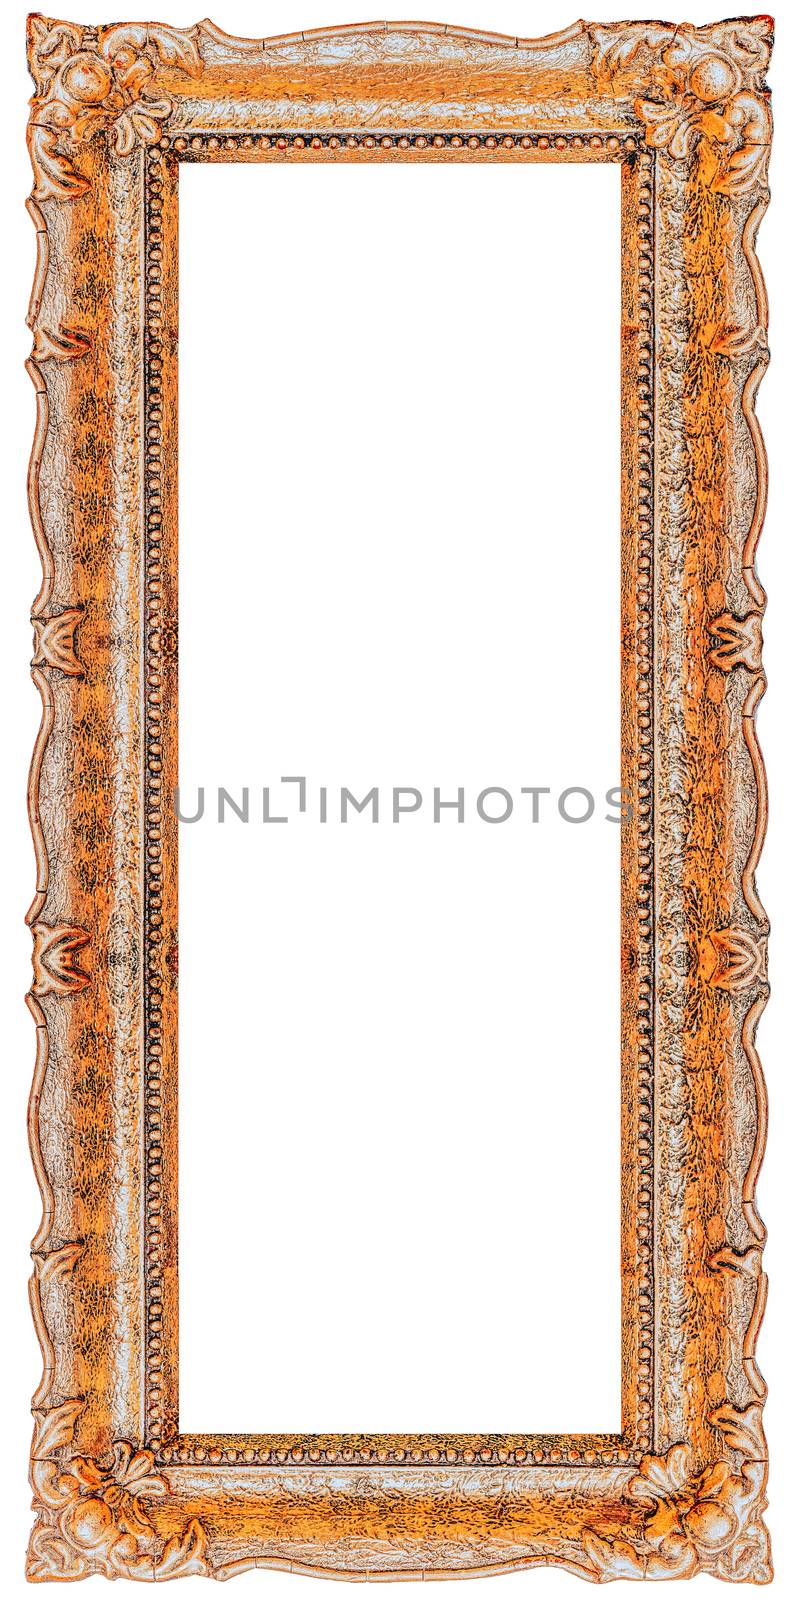 Wide Vertical Old Picture Frame With Empty Copy Space - Stock im by adamr